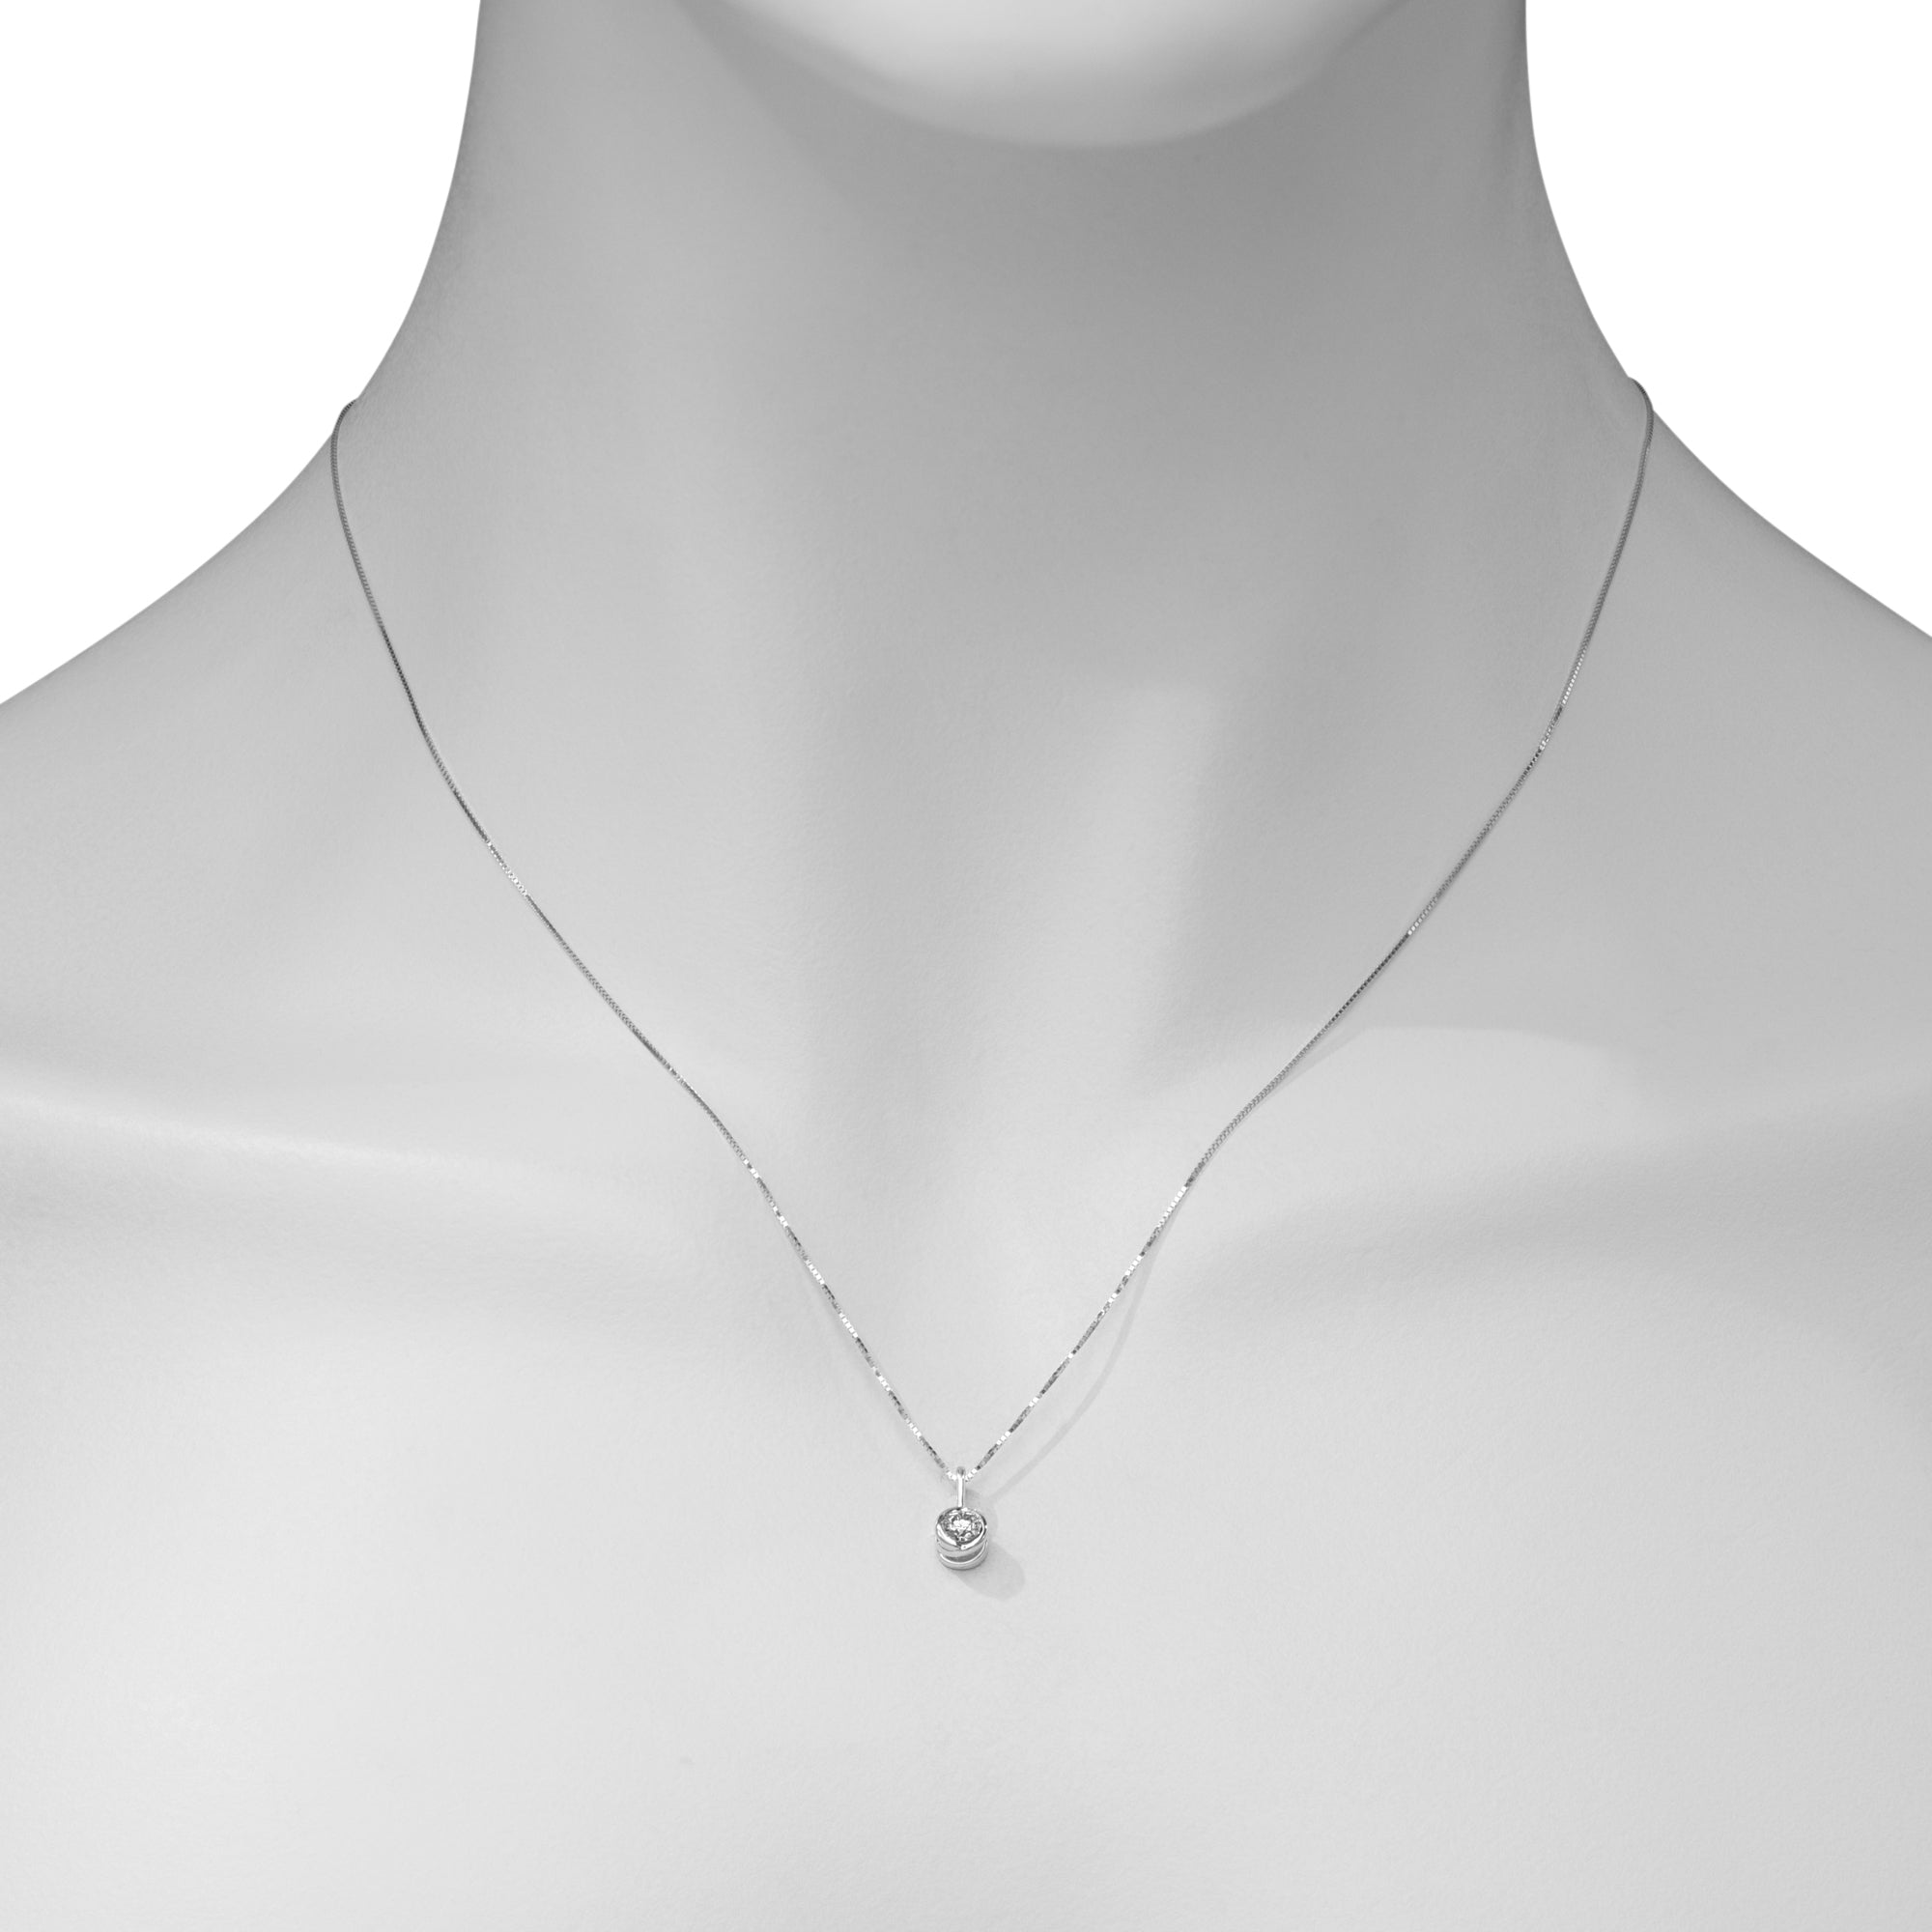 Northern Star Diamond Halo Necklace in 14kt White Gold (1/4ct tw)